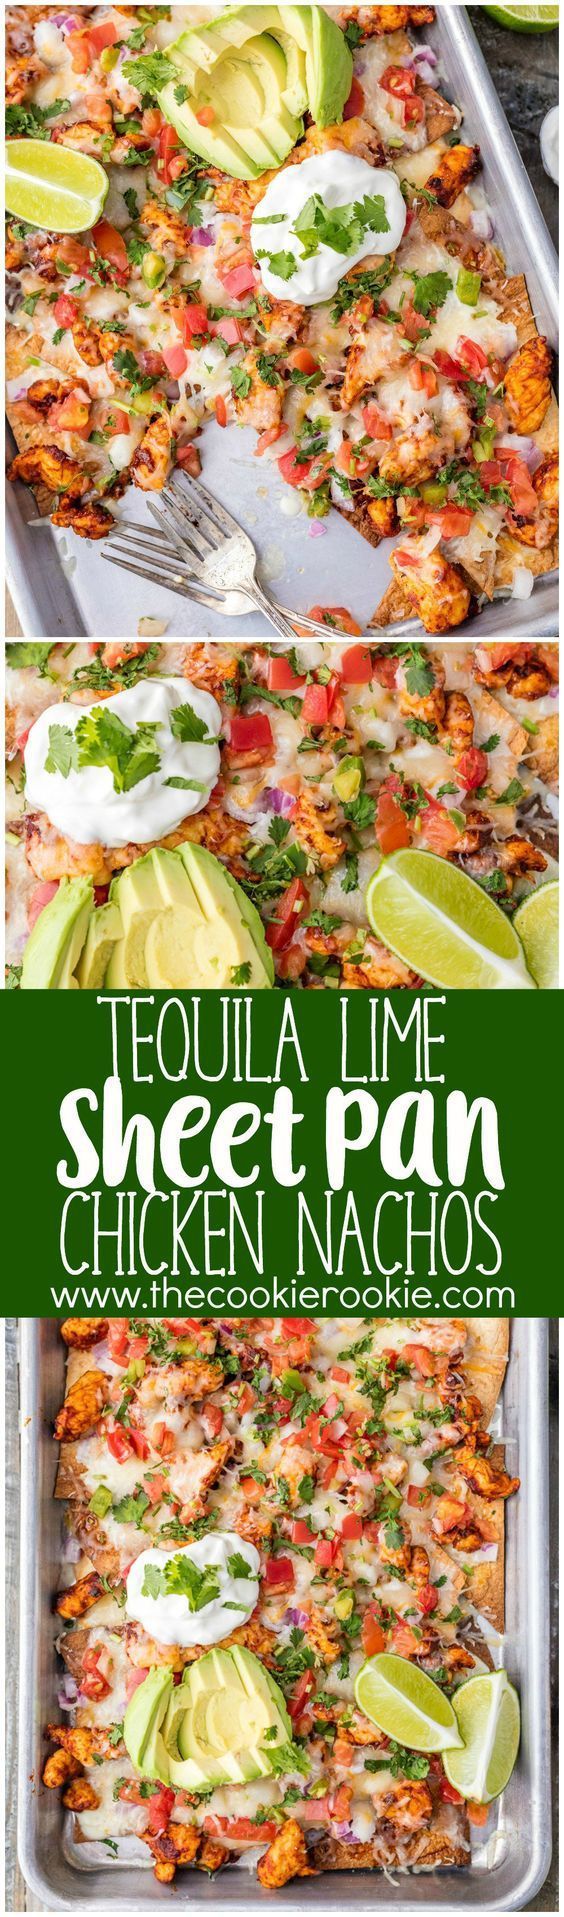 Tequila Lime SHEET PAN Chicken Nachos Recipe via The Cookie Rookie – a great recipe for feeding a crowd with delicious chicken